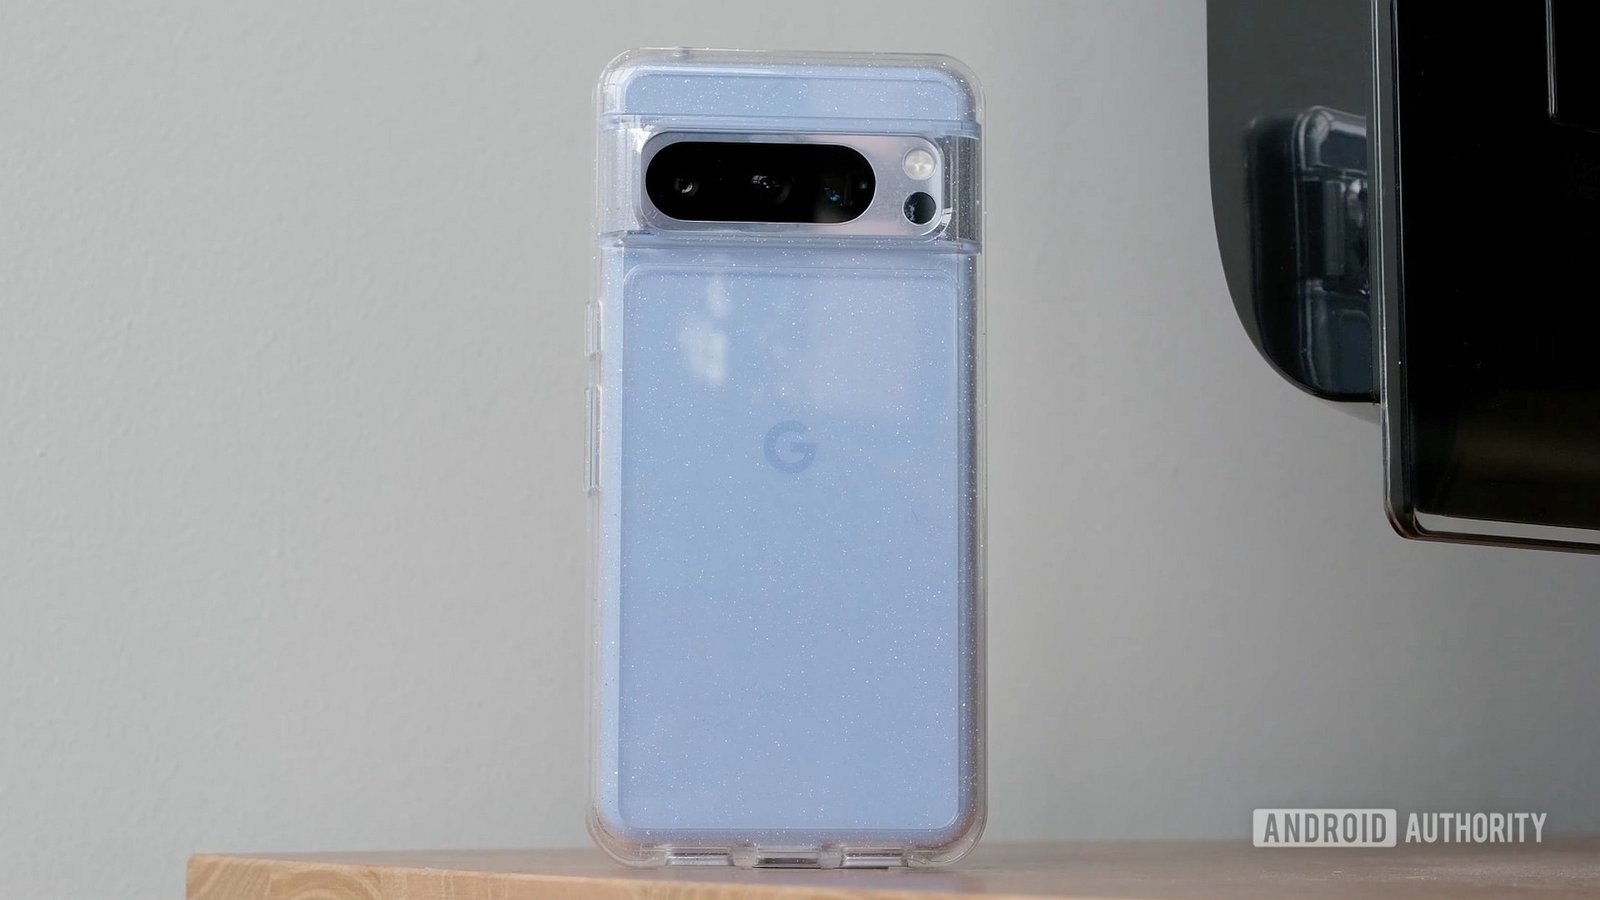 Instead of increasing Pixels’ durability, Google designs them to be case-friendly